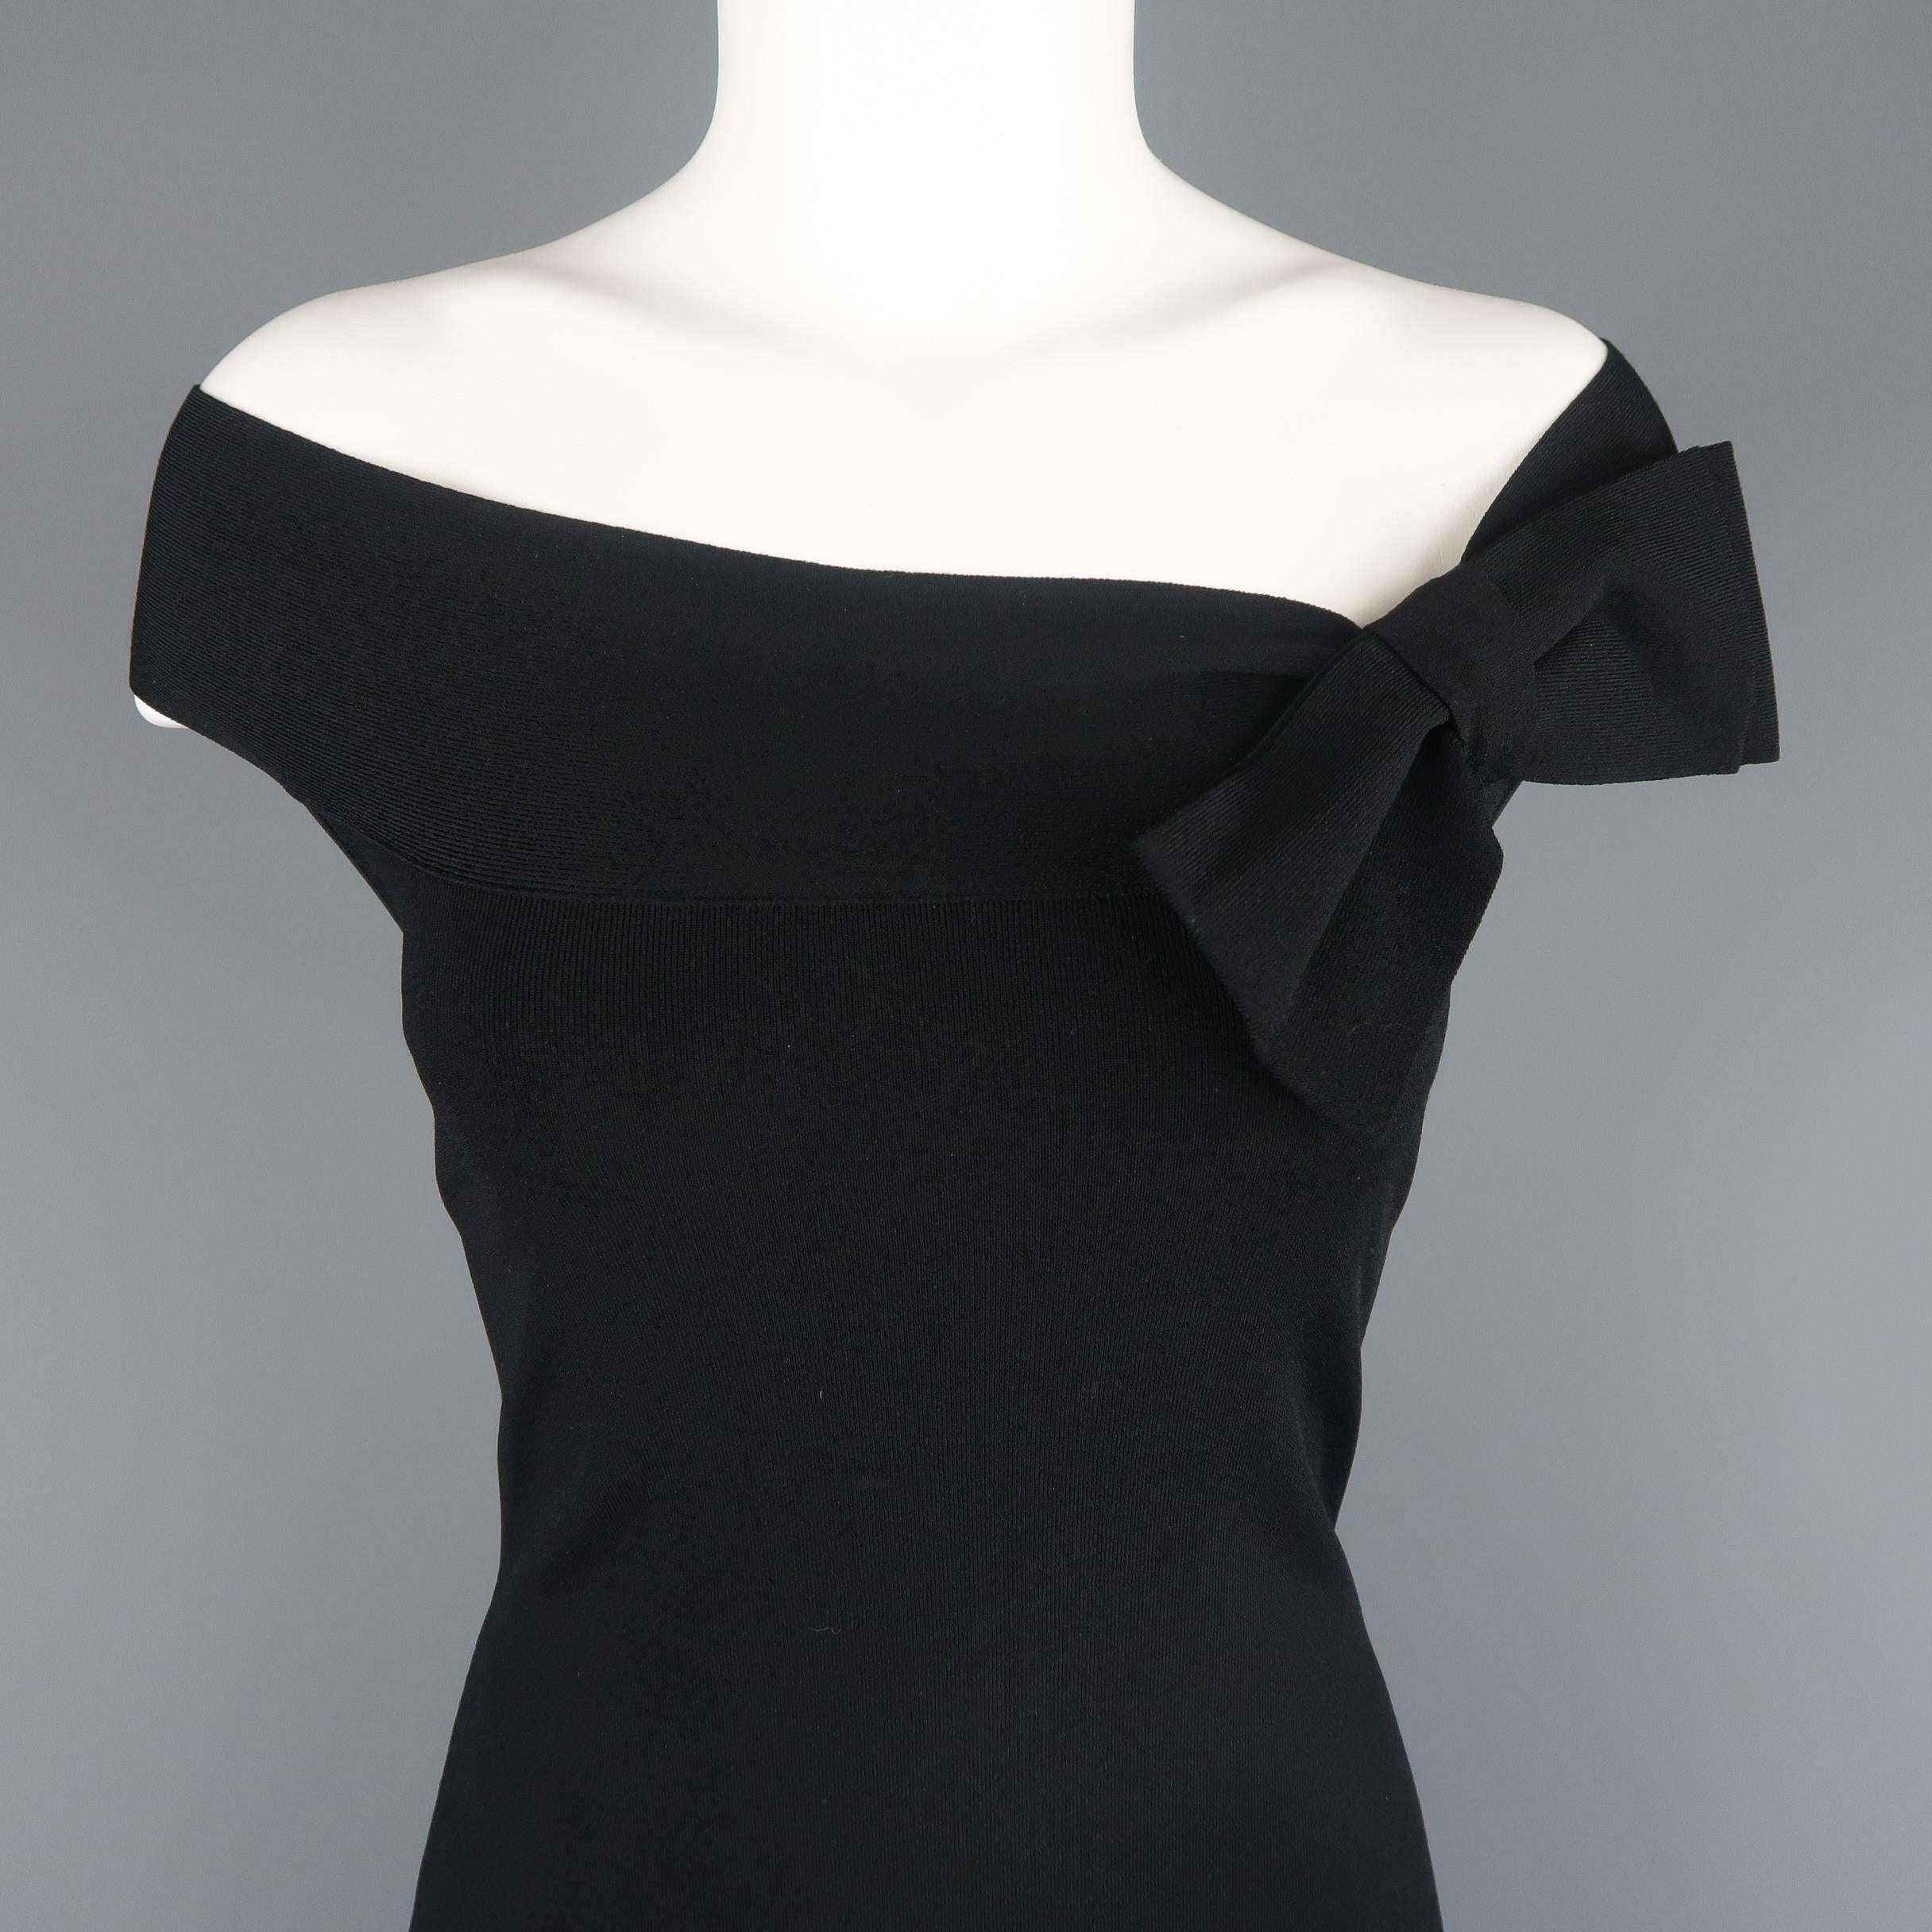 VALENTINO bodycon dress comes in a light weight ribbed stretch material with a wide neckline, oversized bow detail, and lace back panel. Made in Italy.
 
Excellent Pre-Owned Condition.
Marked: M
Measurements:
 
Shoulder: 16 in.
Bust:  34 in.
Waist: